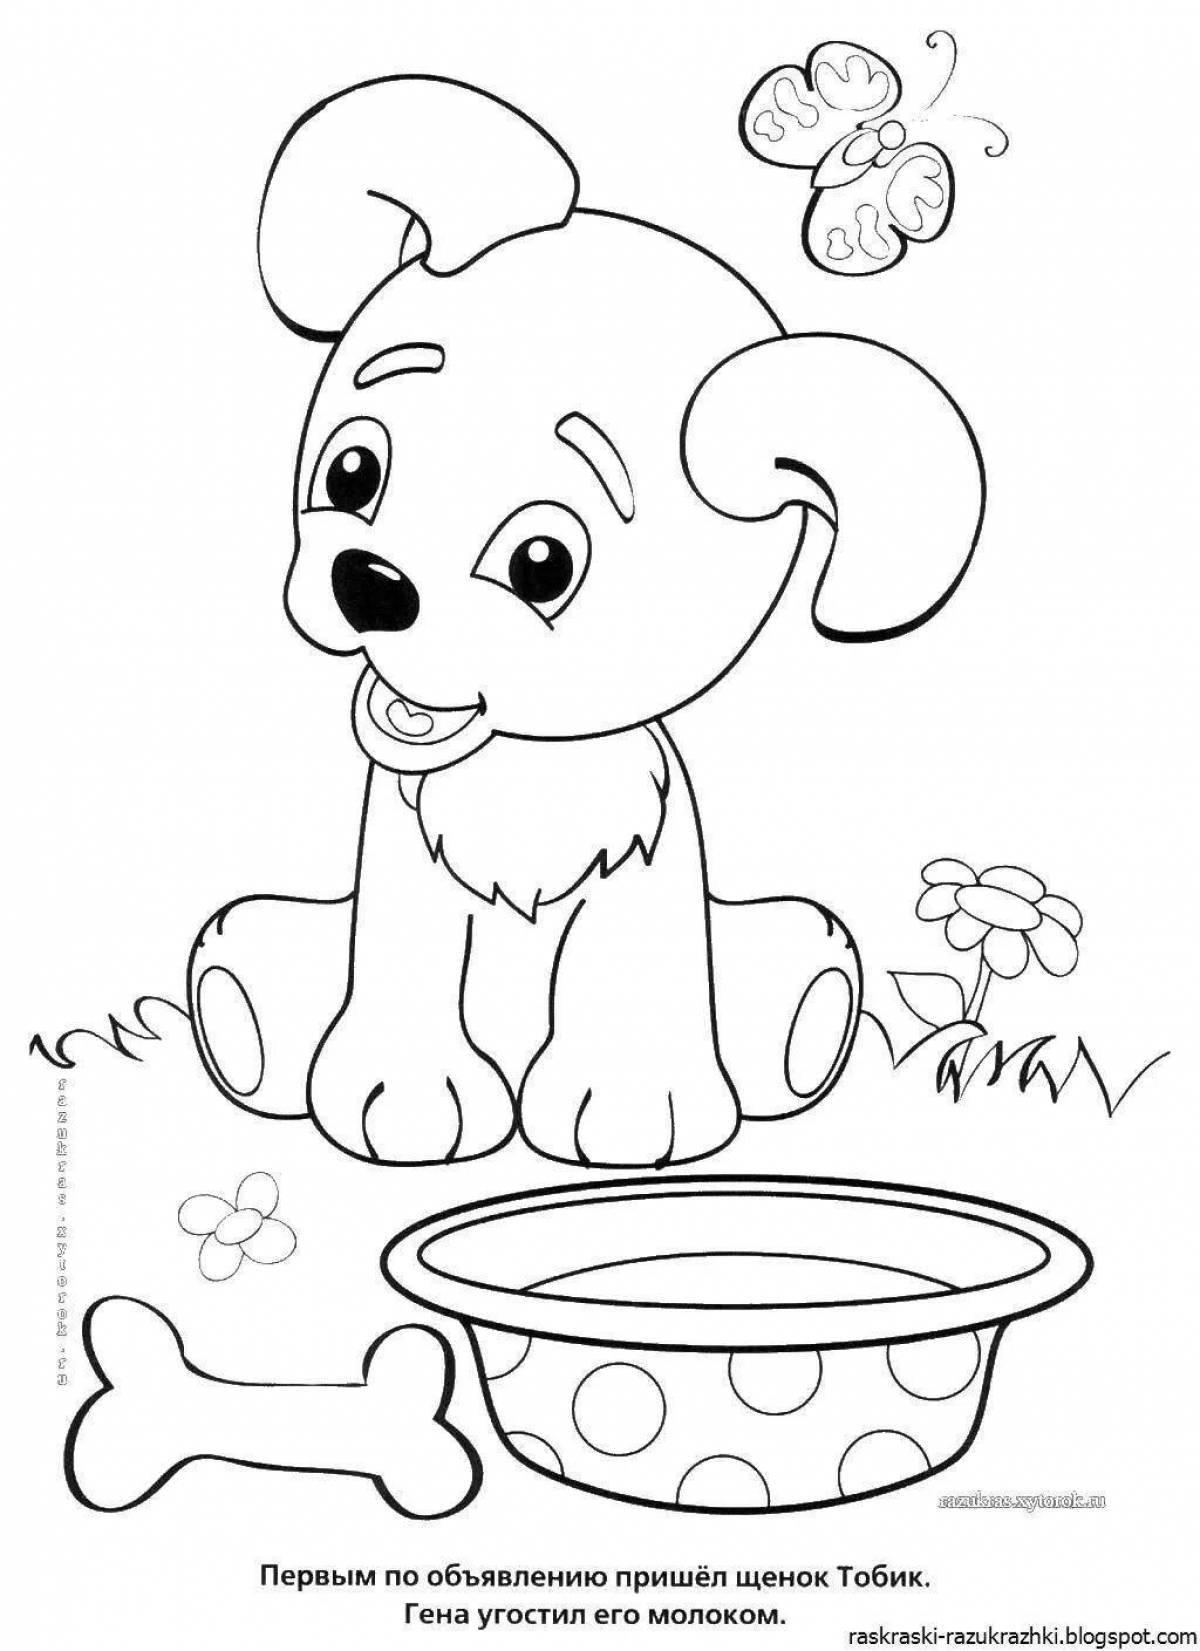 Playful dog coloring book for 5-6 year olds